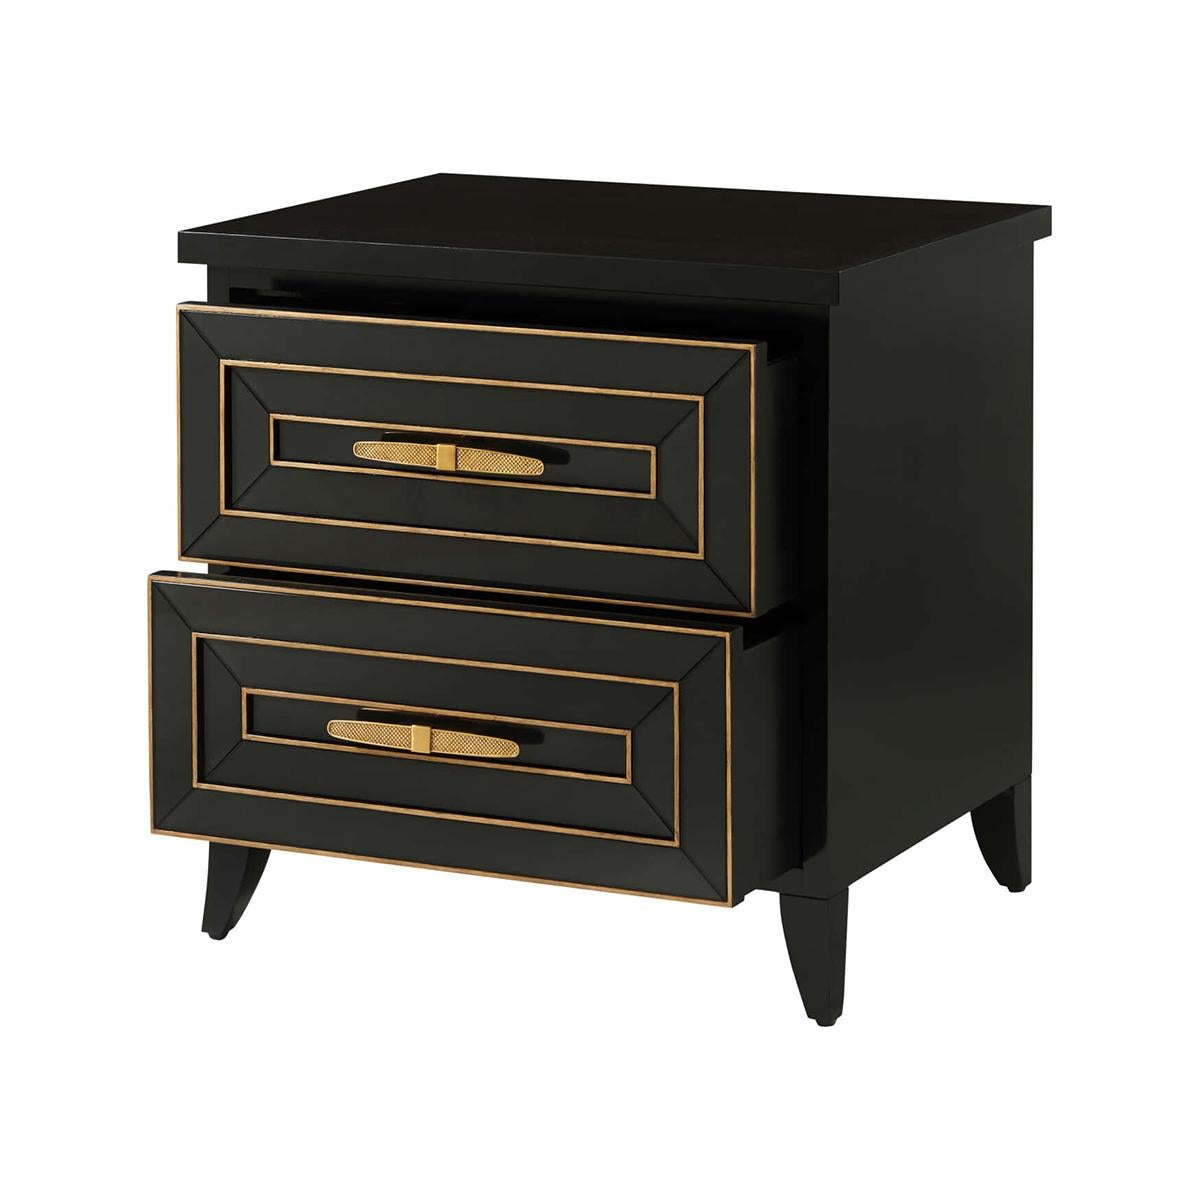 Vietnamese French Art Deco Style Nightstand For Sale